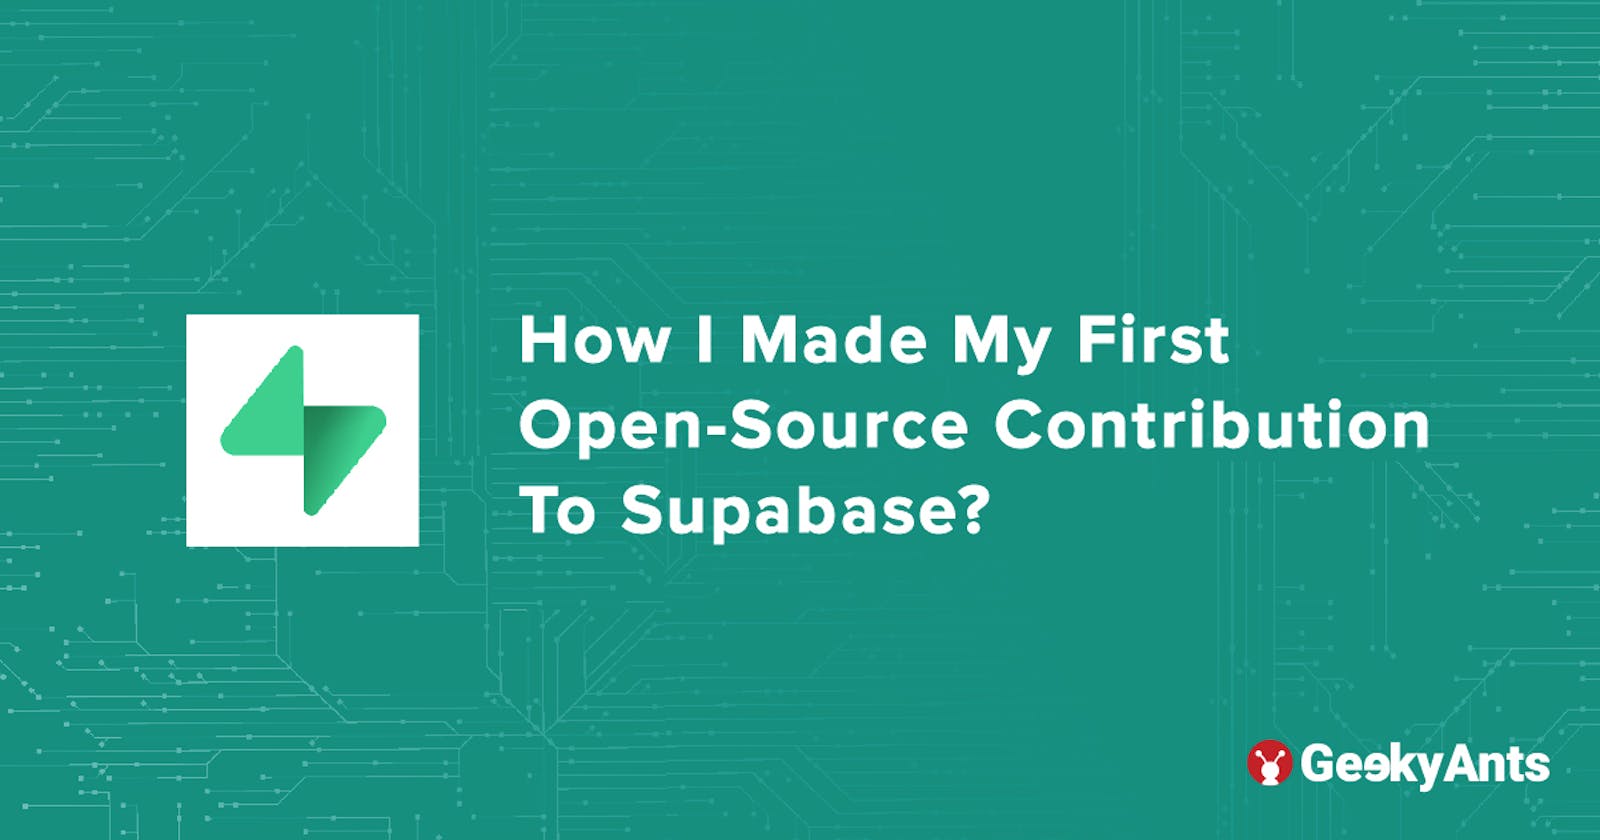 How I Made My First Open-Source Contribution To Supabase?